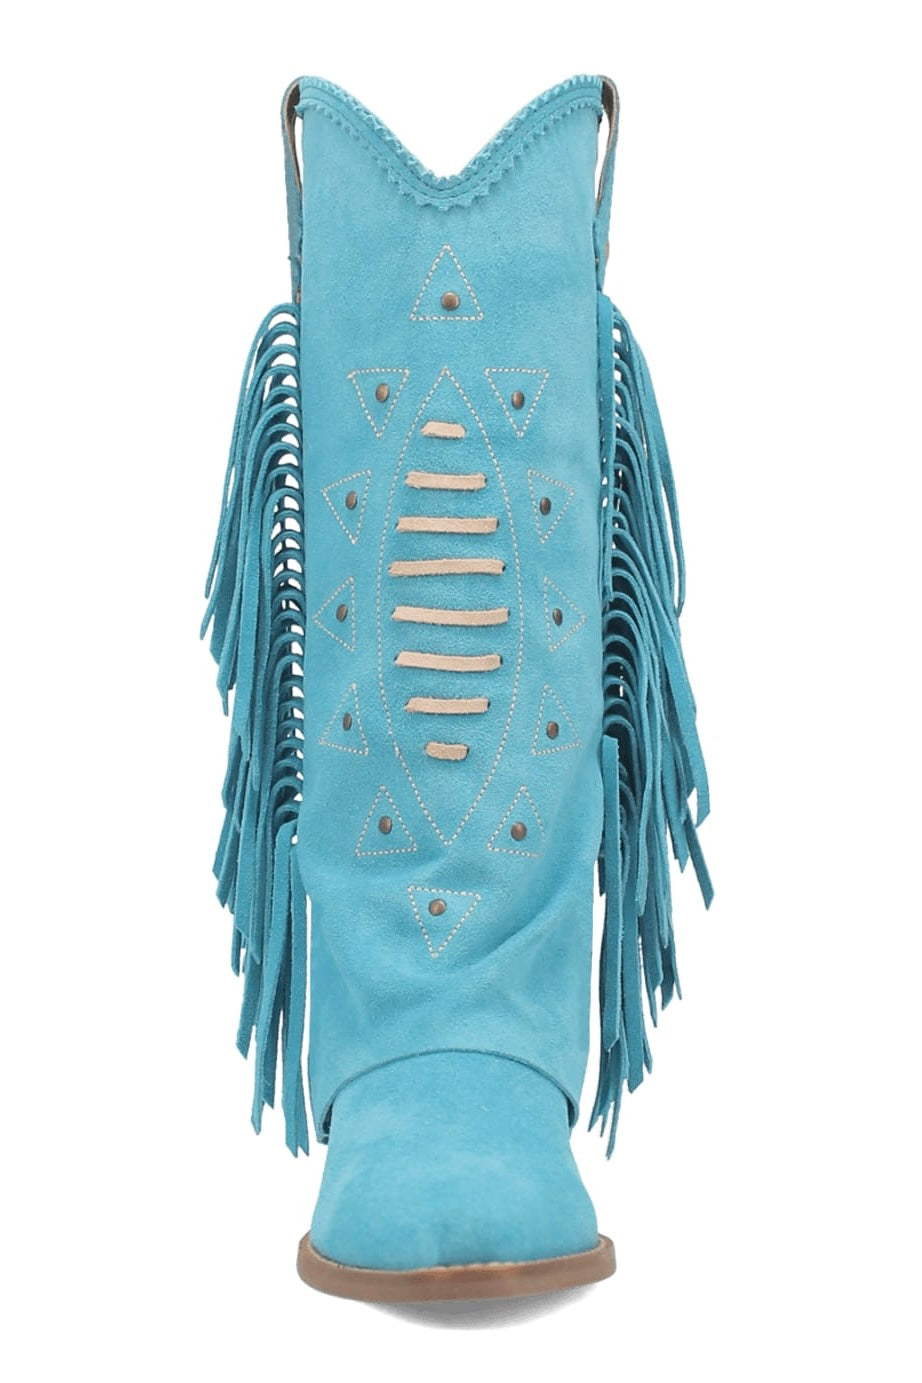 Spirit Trail Leather Boot in Blue